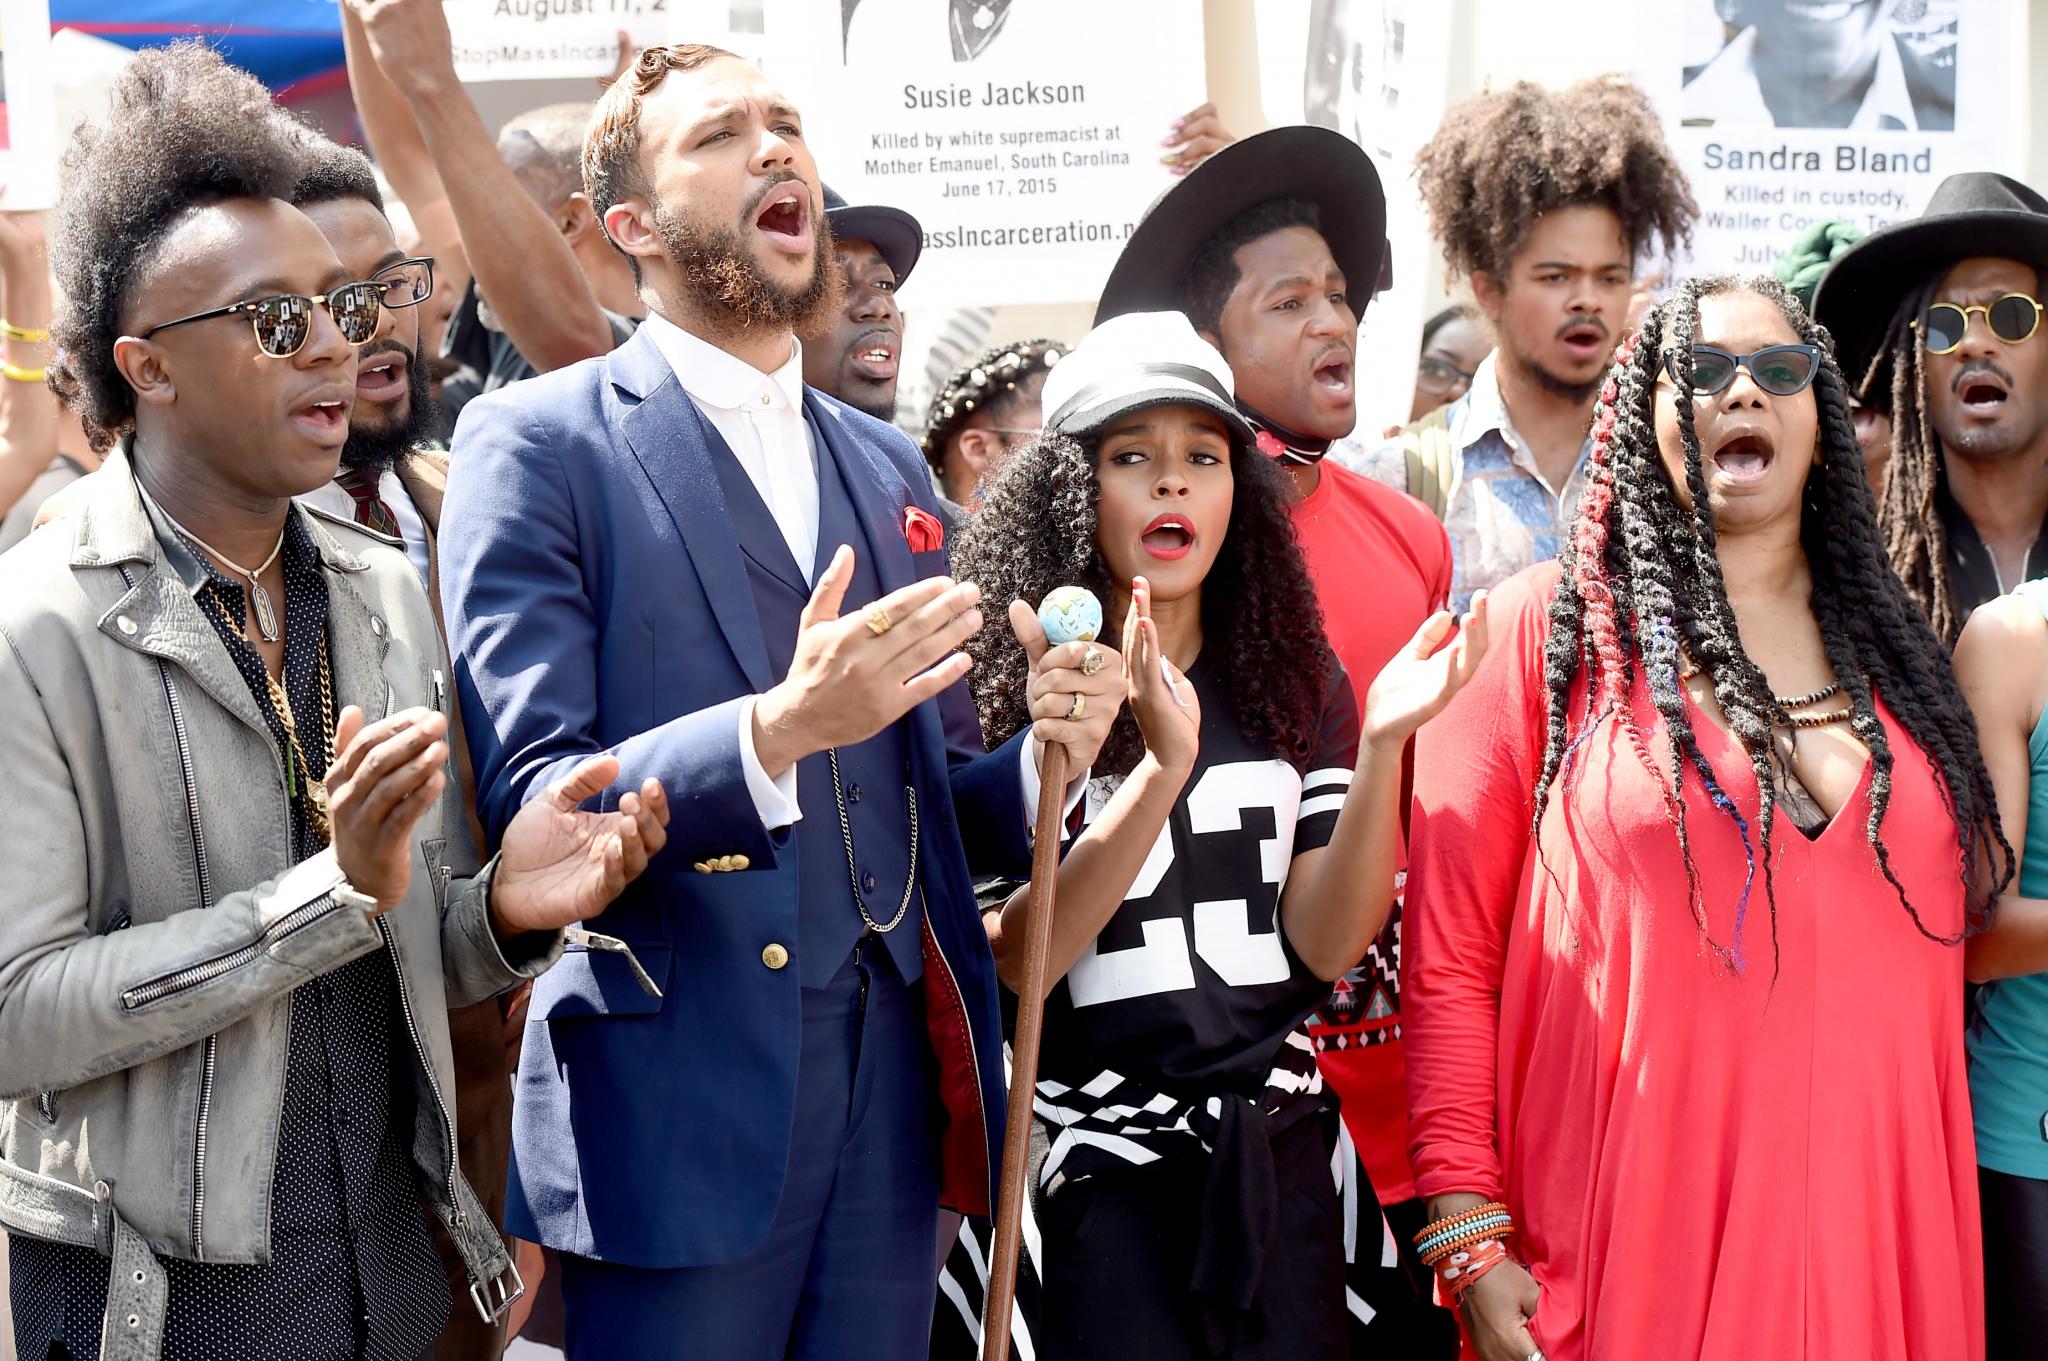 Janelle and Jidenna On the Scene, and More!
